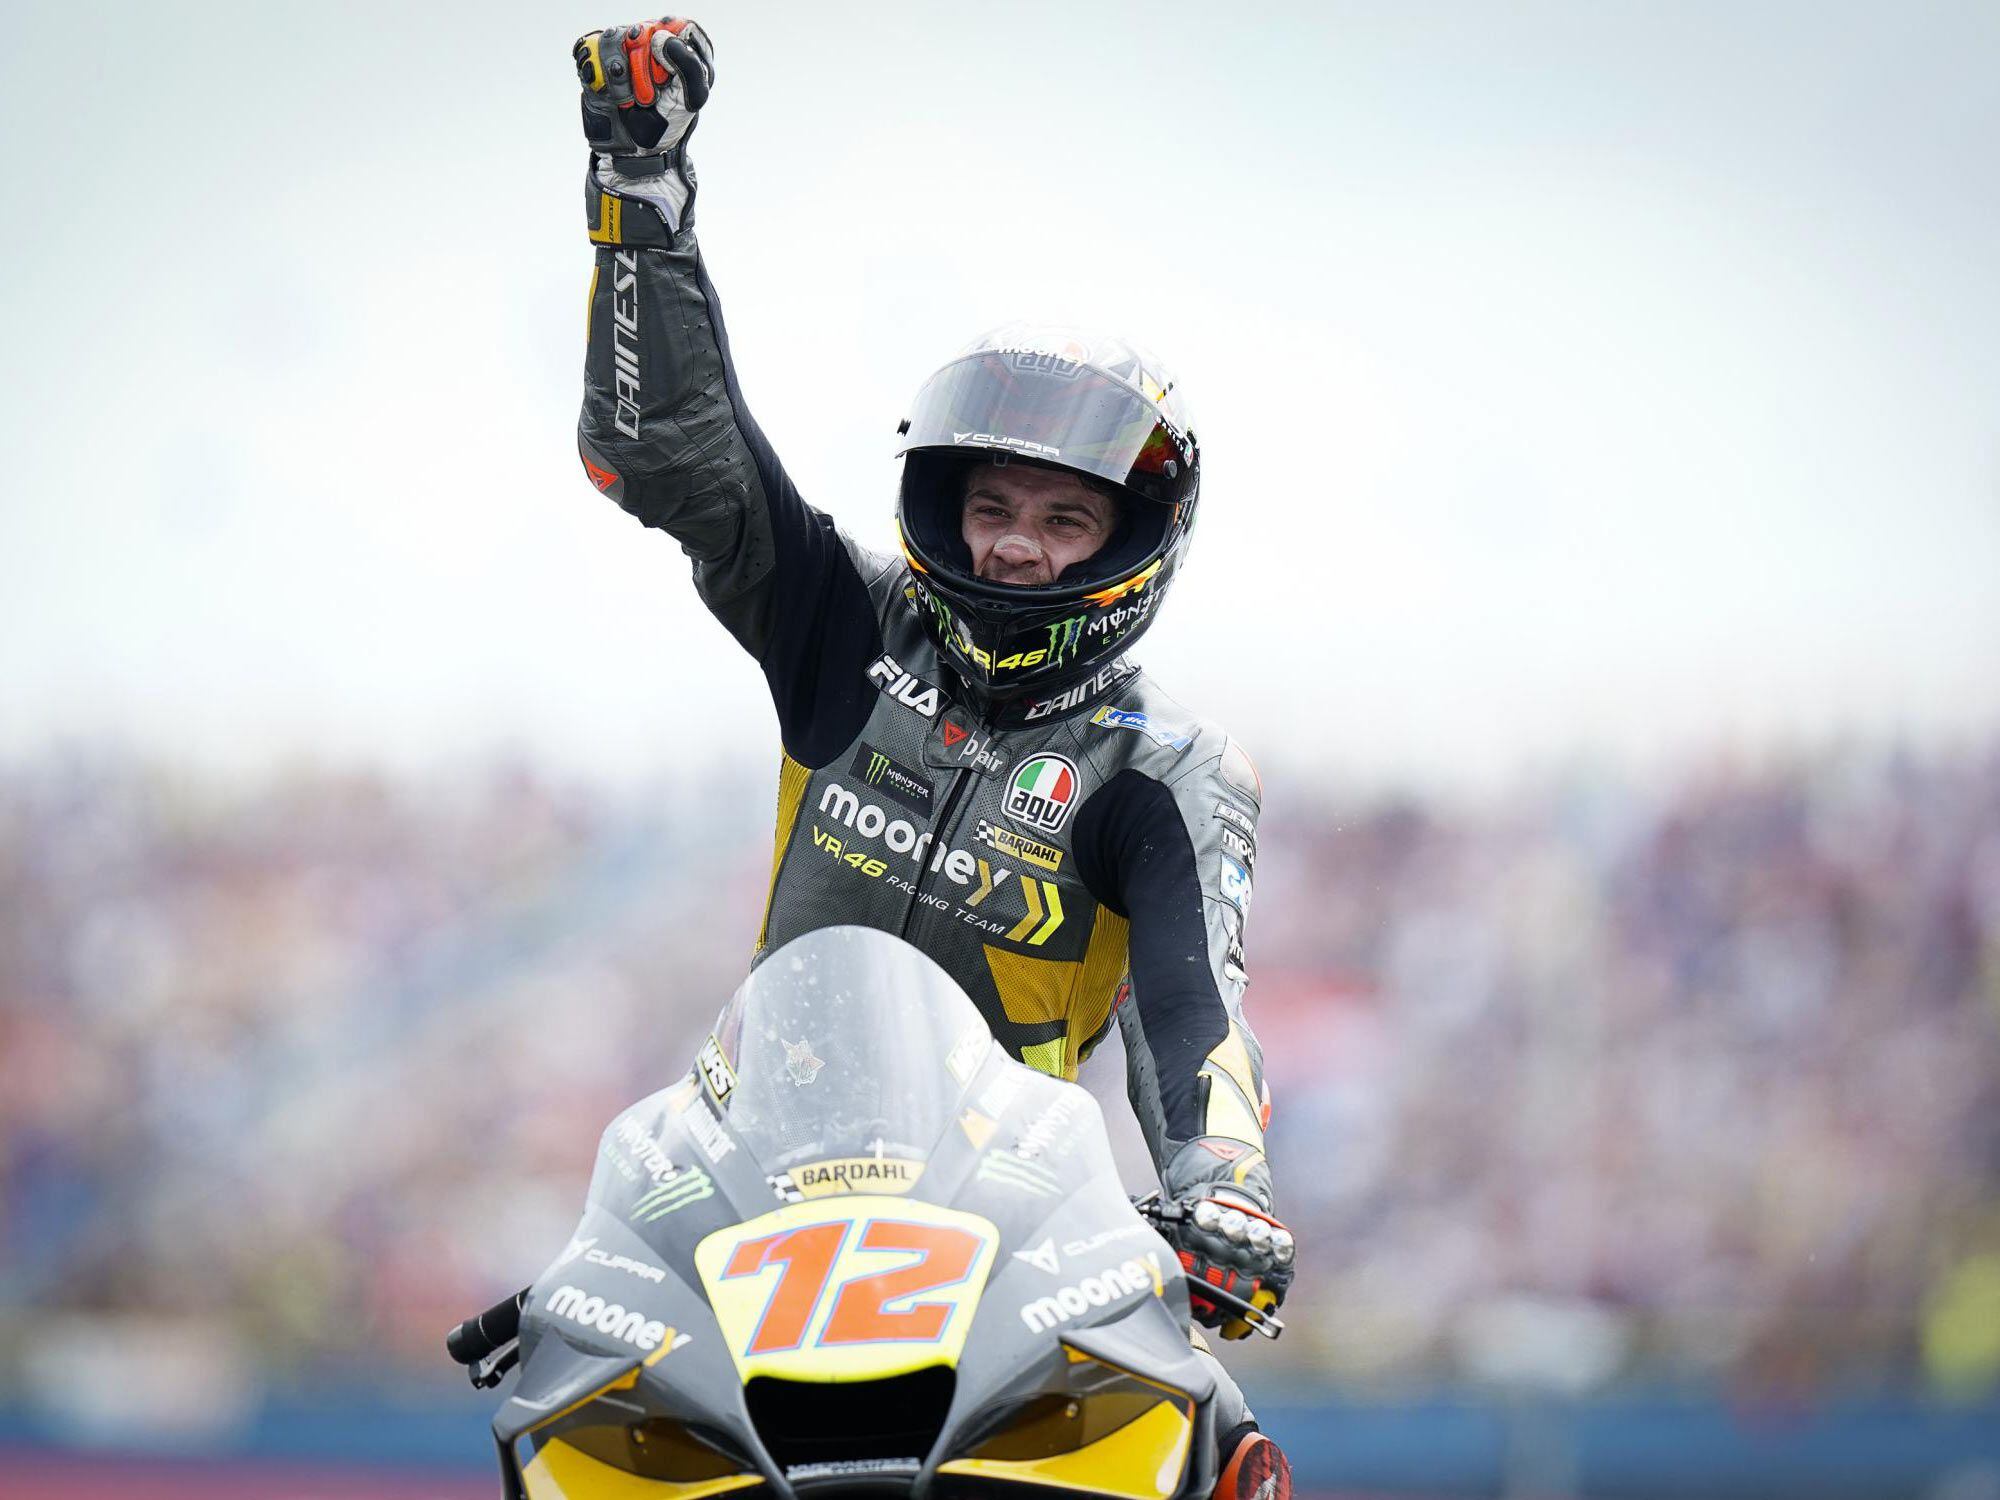 Twenty-three-year-old Marco Bezzecchi (Ducati Mooney VR46 Racing) was pumped after Assen, where he finished a super-close second (just 0.444 of a second behind) and scored his first premier-class podium.